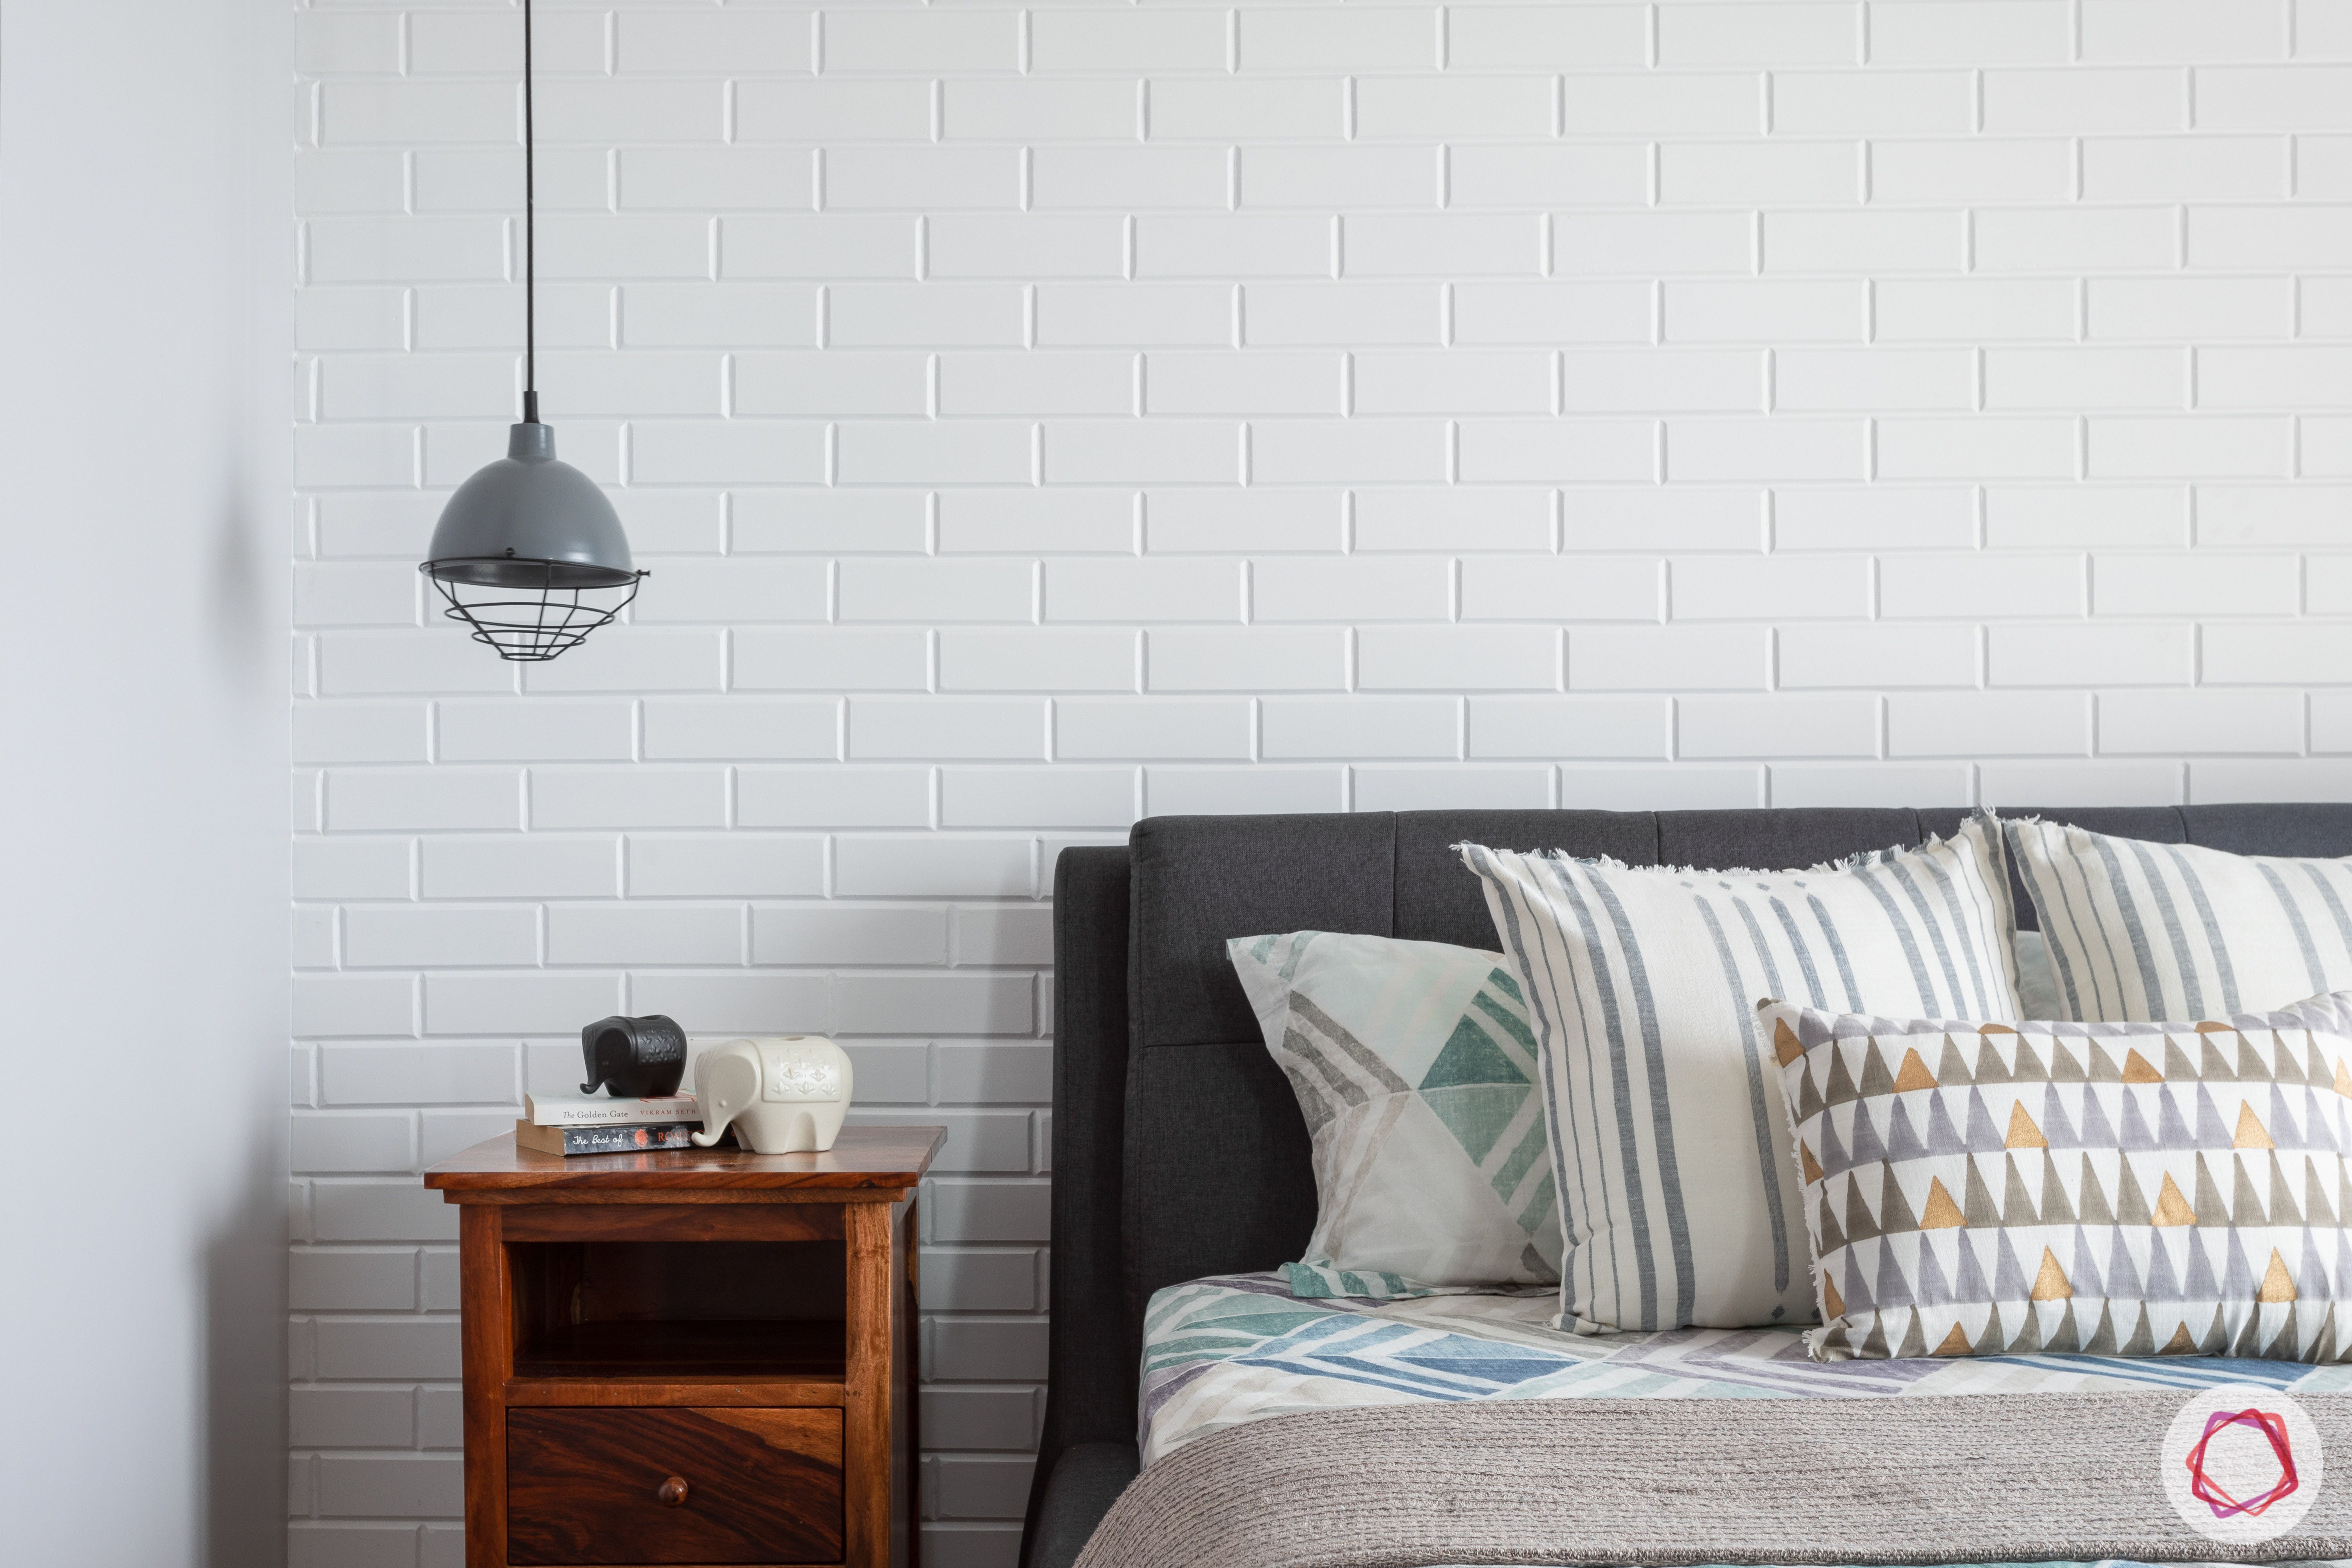 crescent bay-master bedroom-wooden side table-mesh pendant light-exposed brick wall